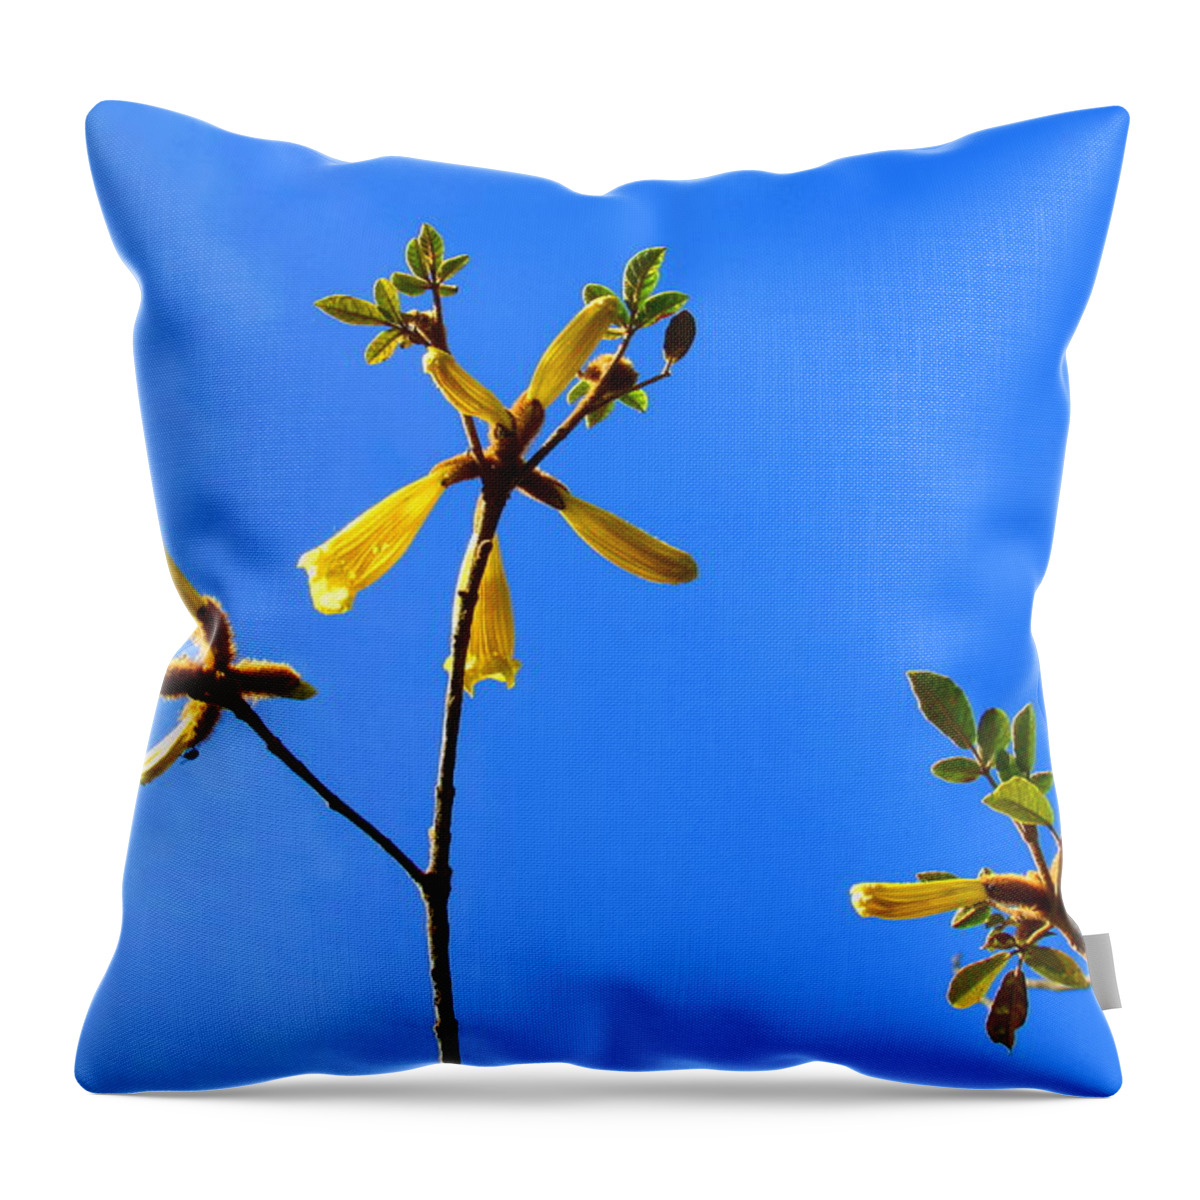 Orchid Throw Pillow featuring the photograph Flowers by Cesar Vieira